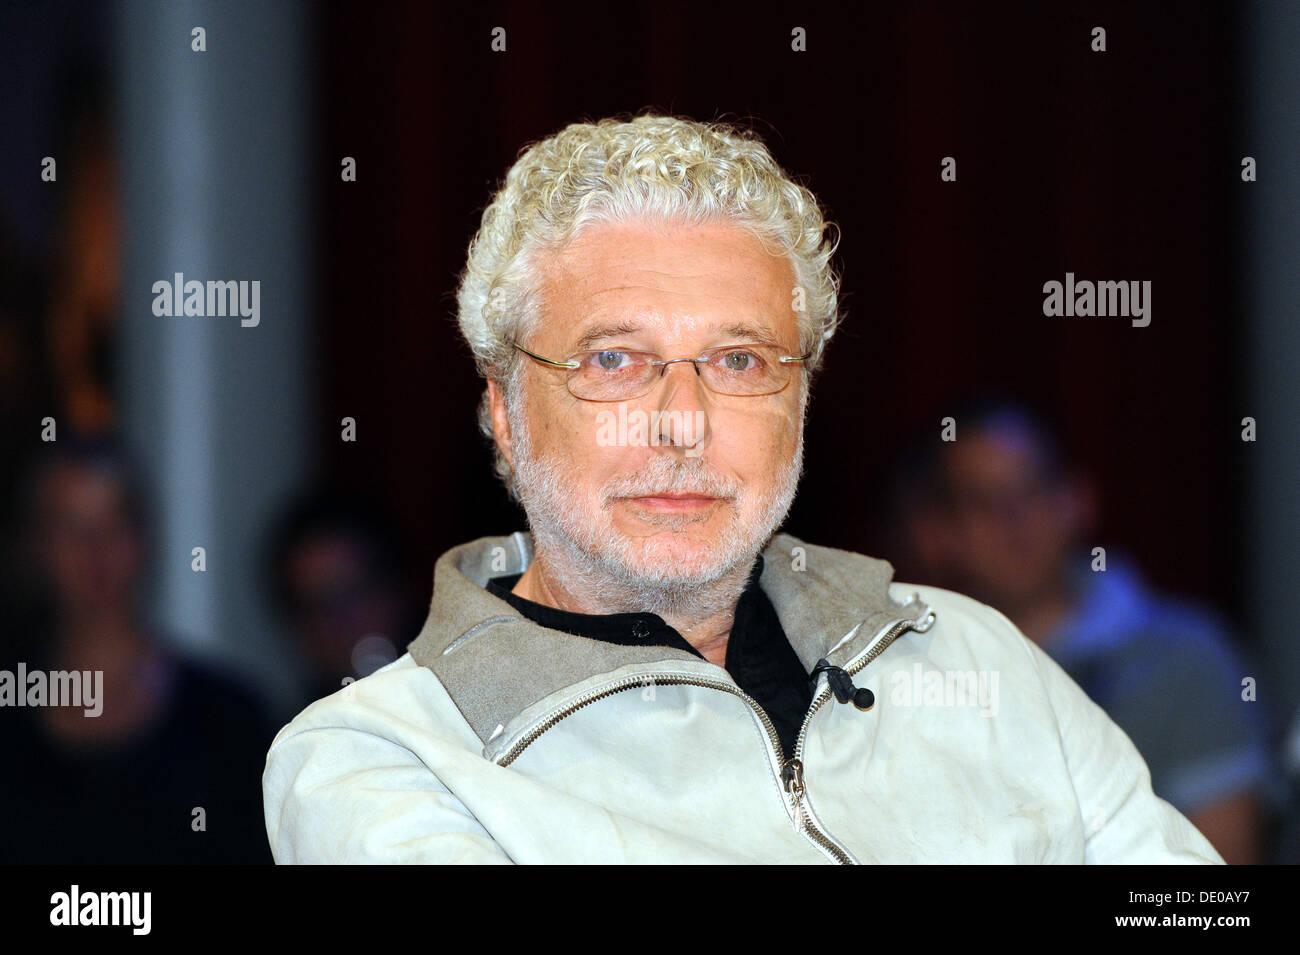 Bremen, Germany. 06th Sep, 2013. Austrian artist Andre Heller is a guest at the Radio Bremen talkshow 3nach 9 (lit: 3past 9) in Bremen, Germany, 06 September 2013. Photo: Ingo Wagner/dpa/Alamy Live News Stock Photo